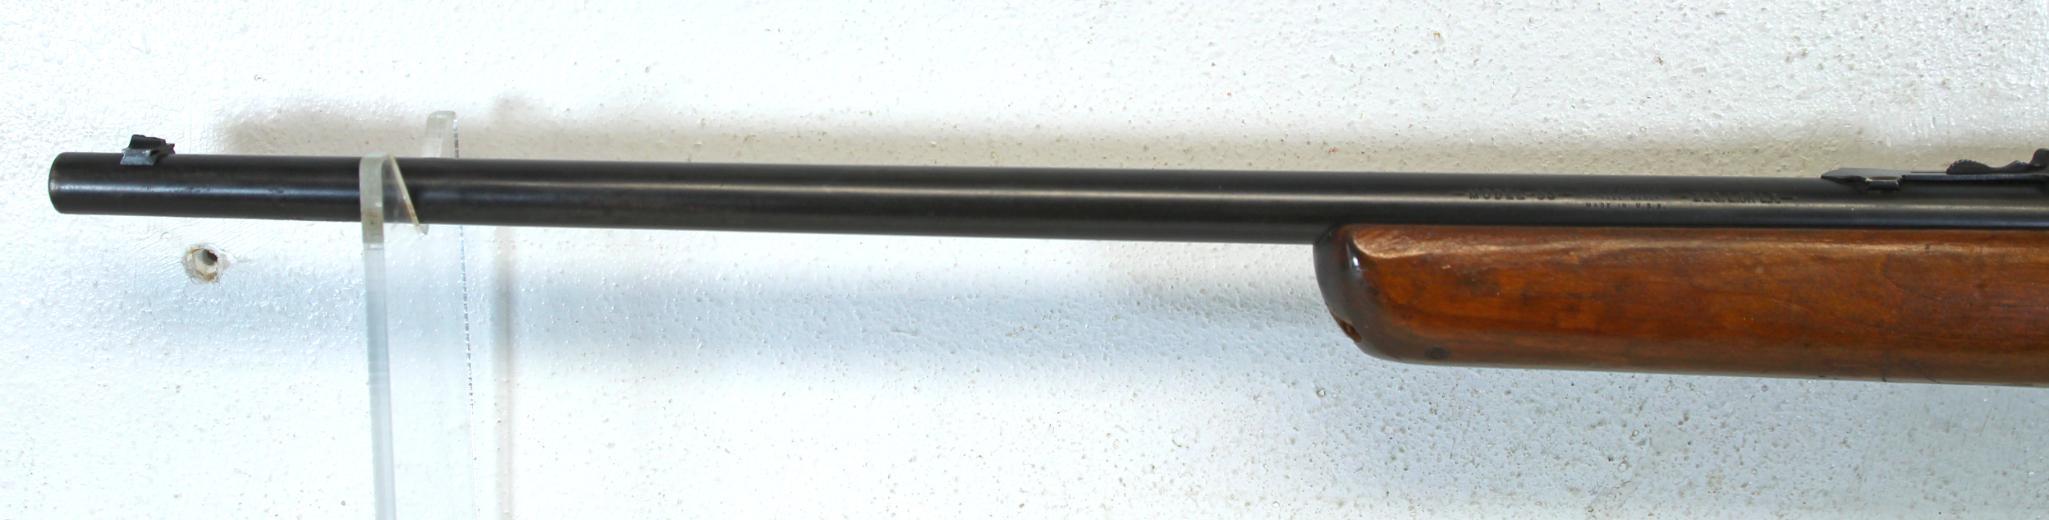 Winchester Model 55 .22 S,L,LR Single Shot Rifle Side Plate Mounted for Scope... Holes In Stock & En